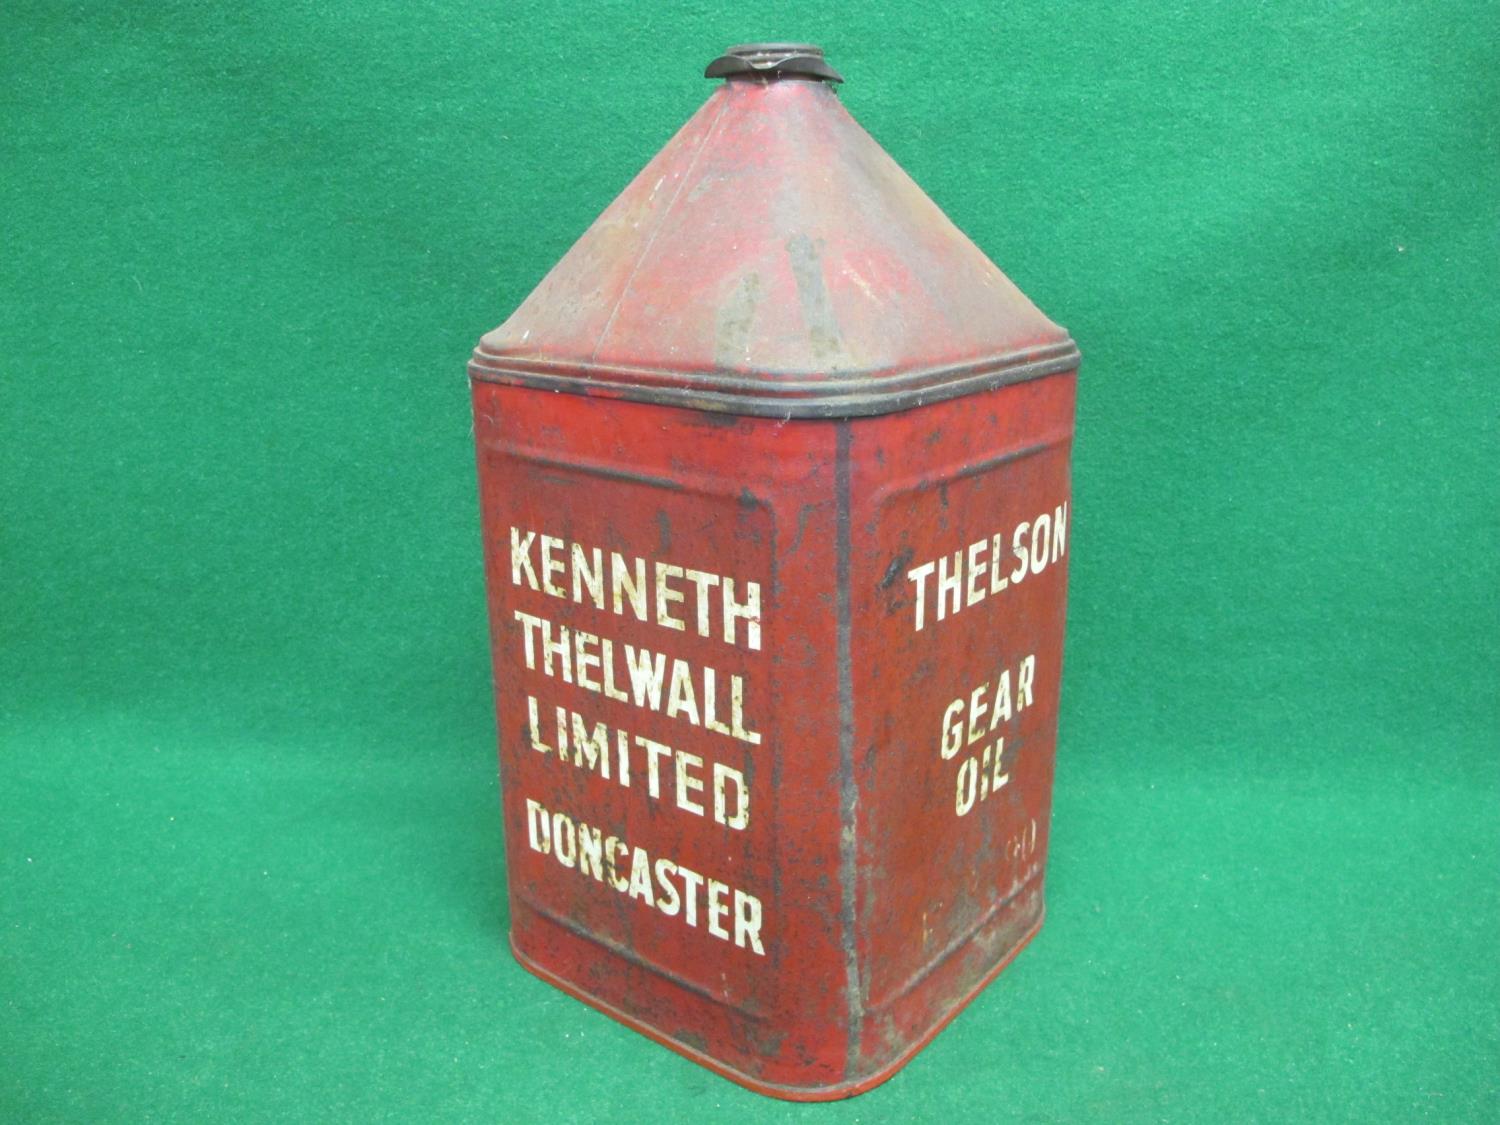 Thelson Gear Oil pyramid can with cap, handle and Kenneth Thelwall Limited Doncaster on two - Image 2 of 3